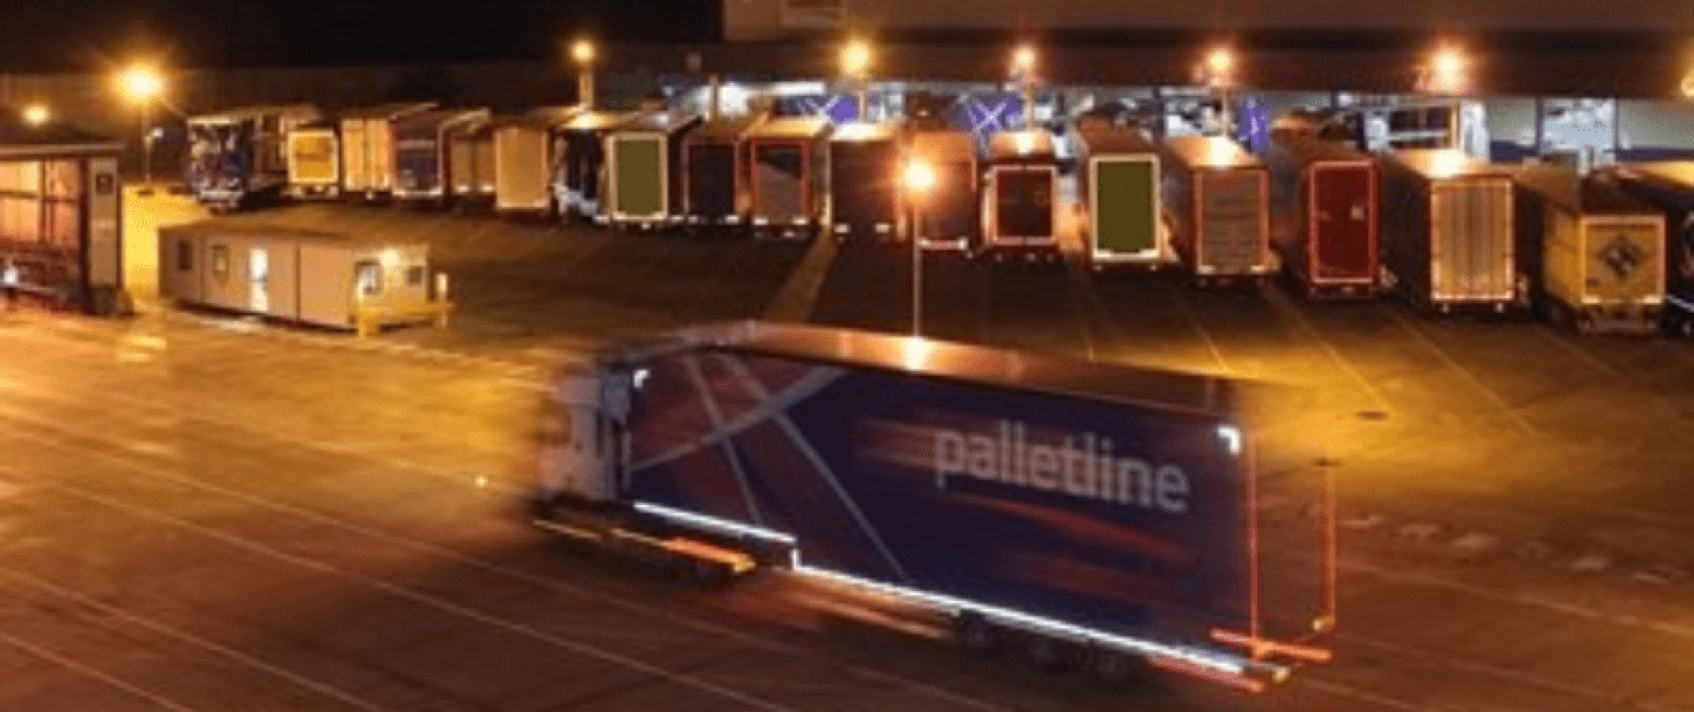 Benefits of the Masters Logistical and Palletline network for your logistics needs